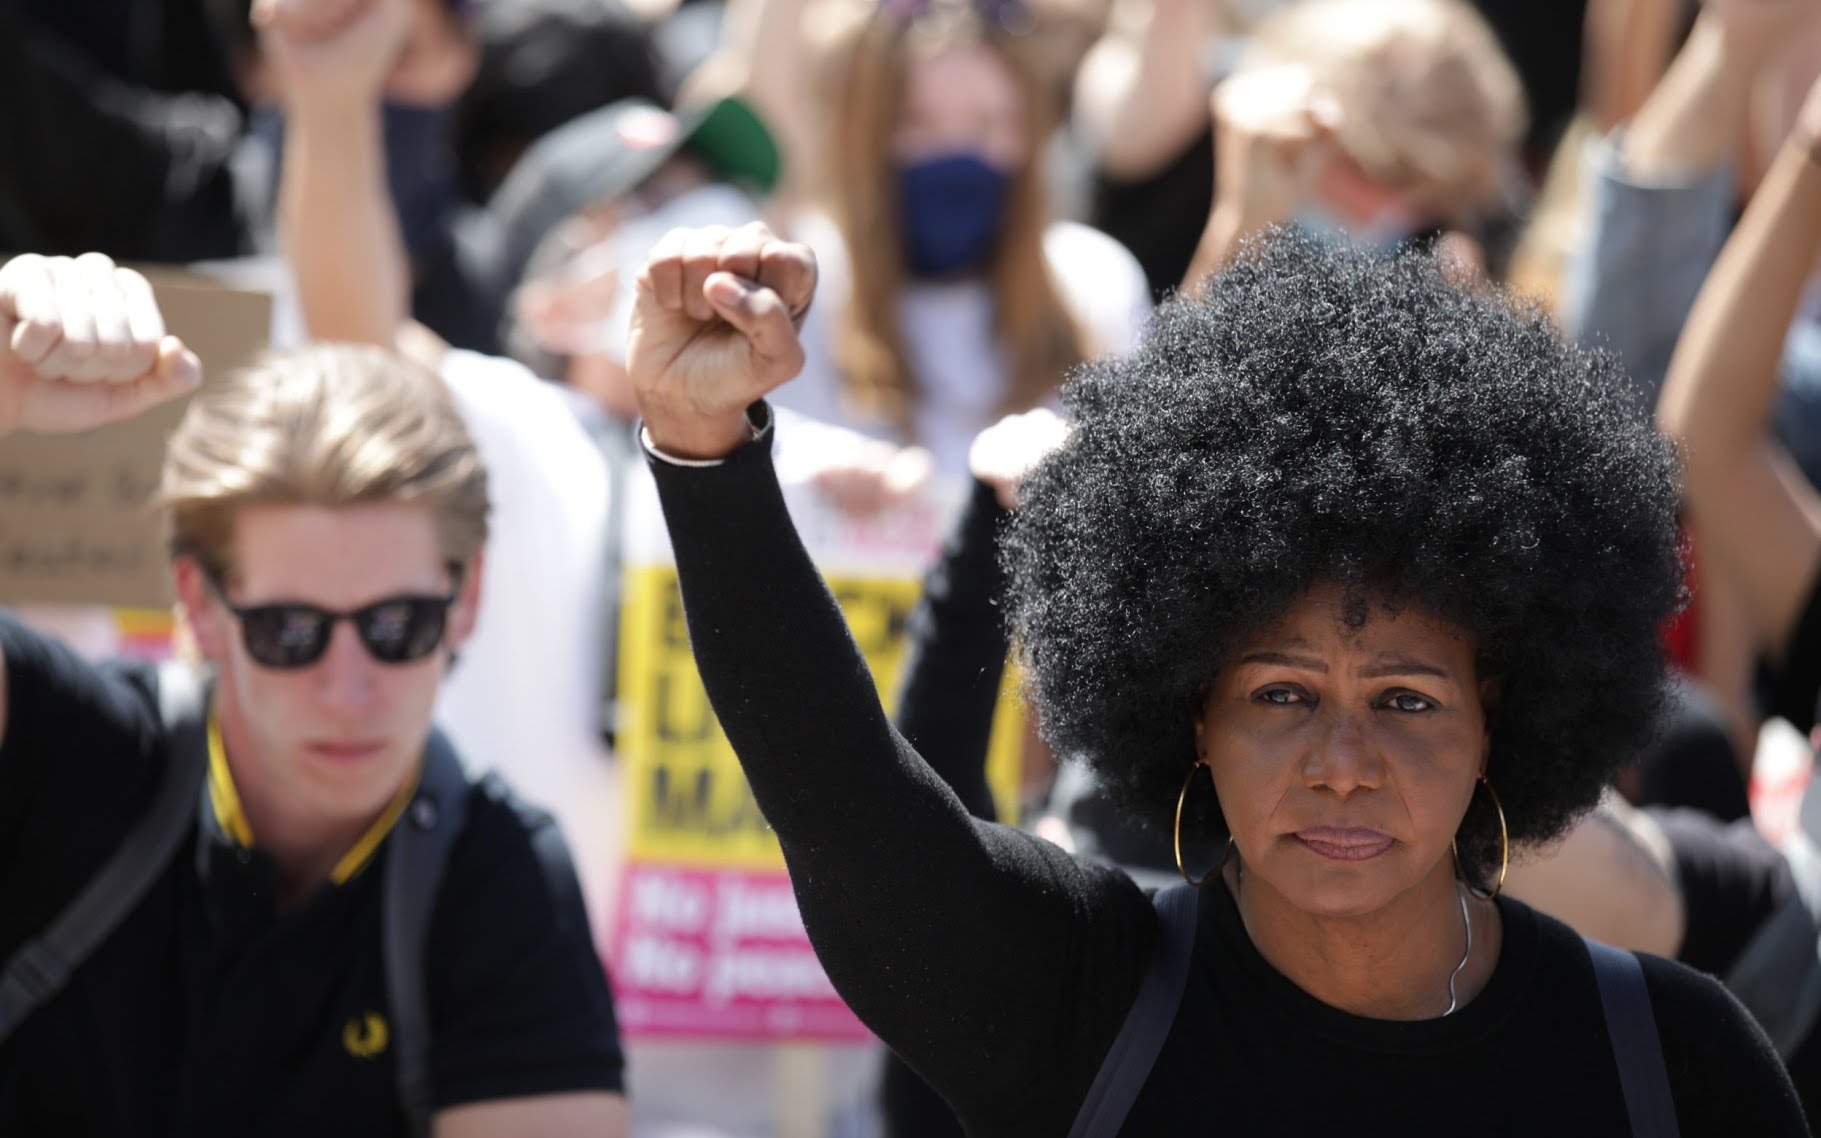 Keep going for Breonna Taylor – protest on Sat 11 July across the UK